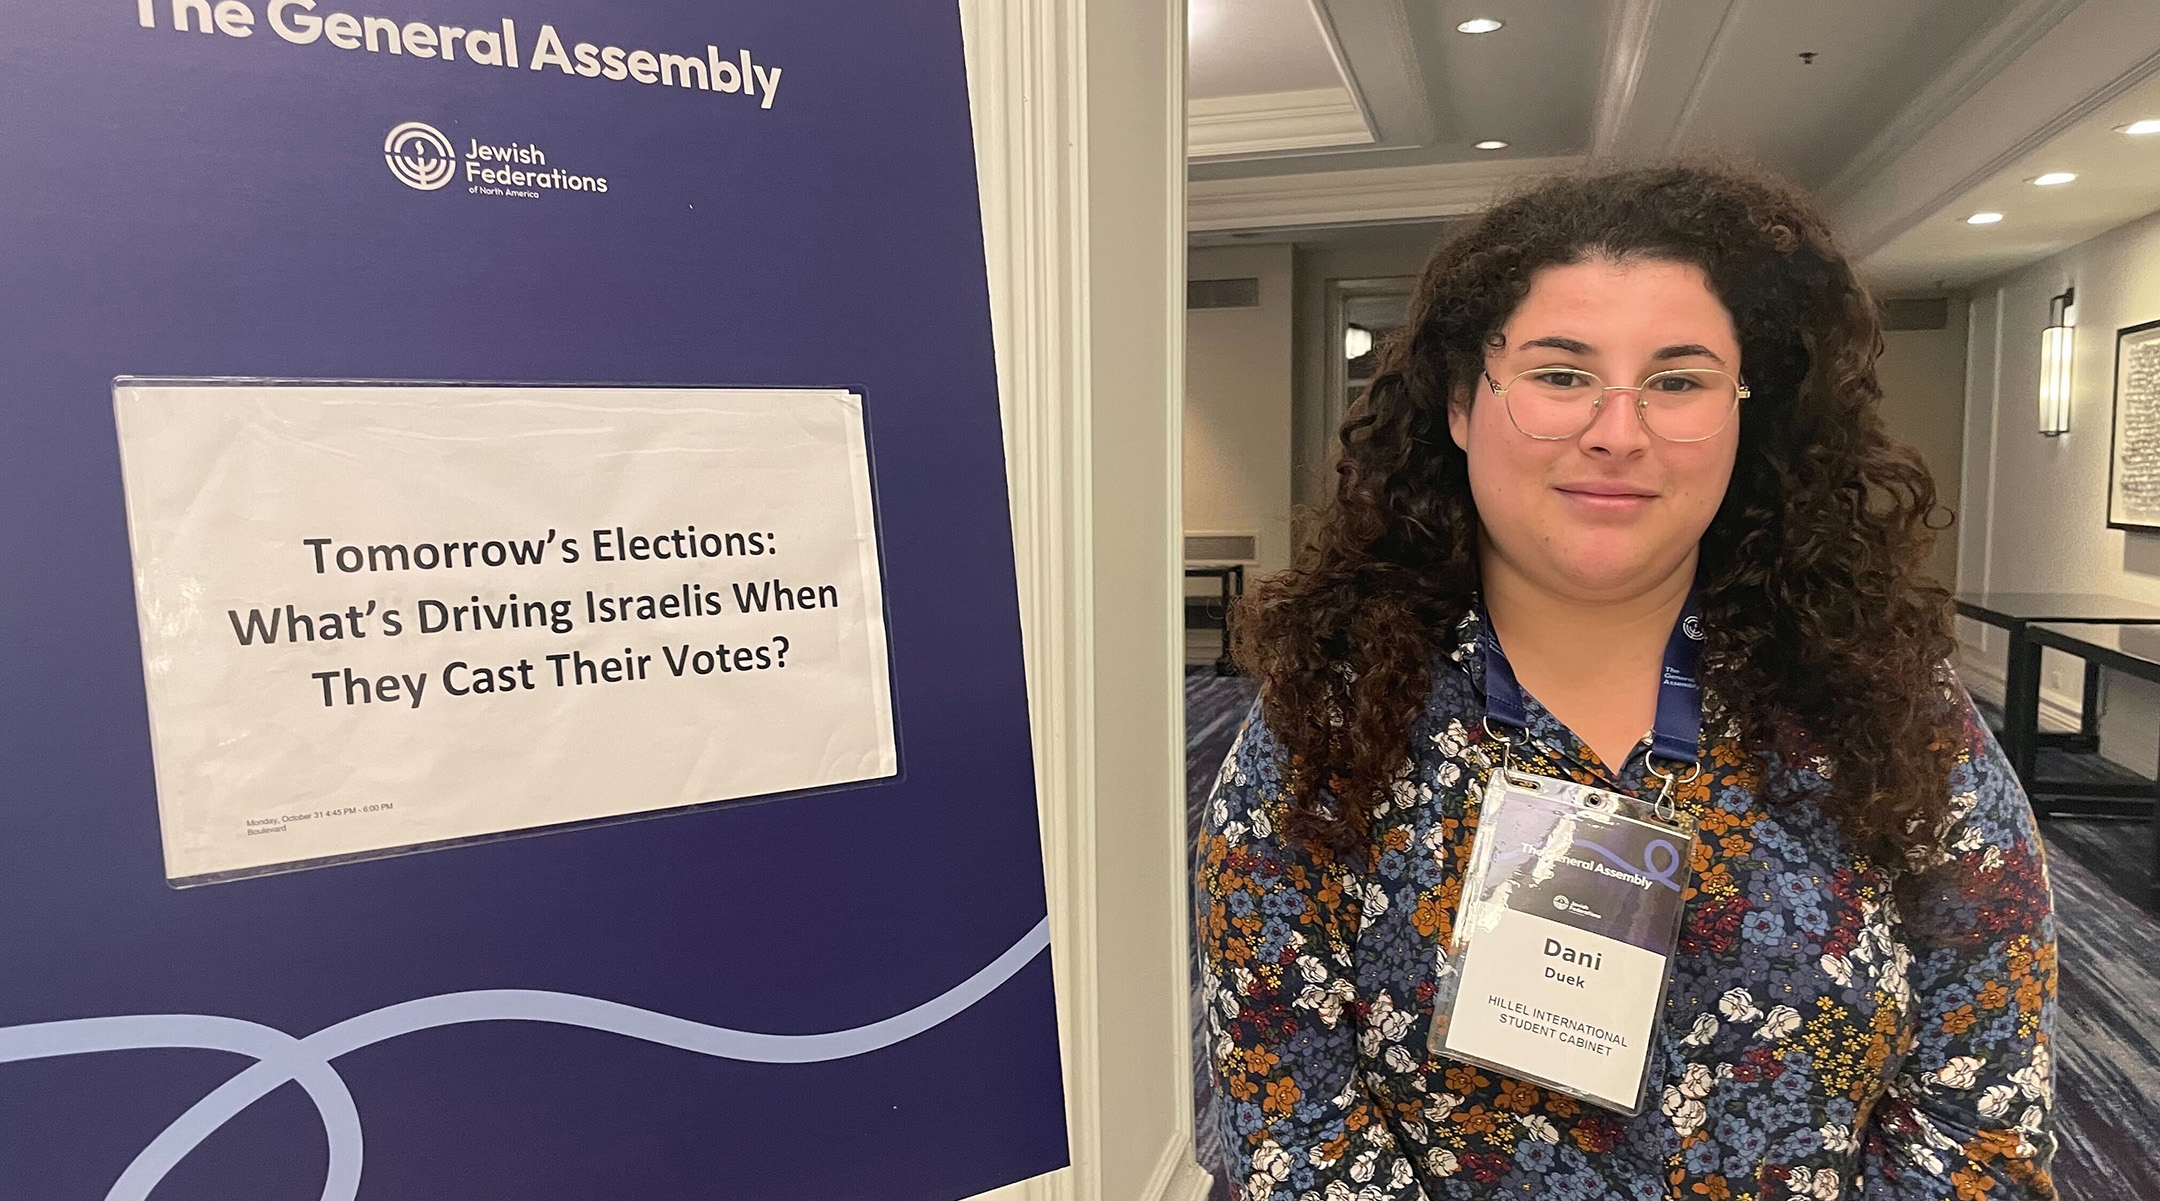 Dani Duek, a leader in Hillel International’s student cabinet, shown at the General Assembly of the Jewish Federations of North America in Chicago. (Philissa Cramer)